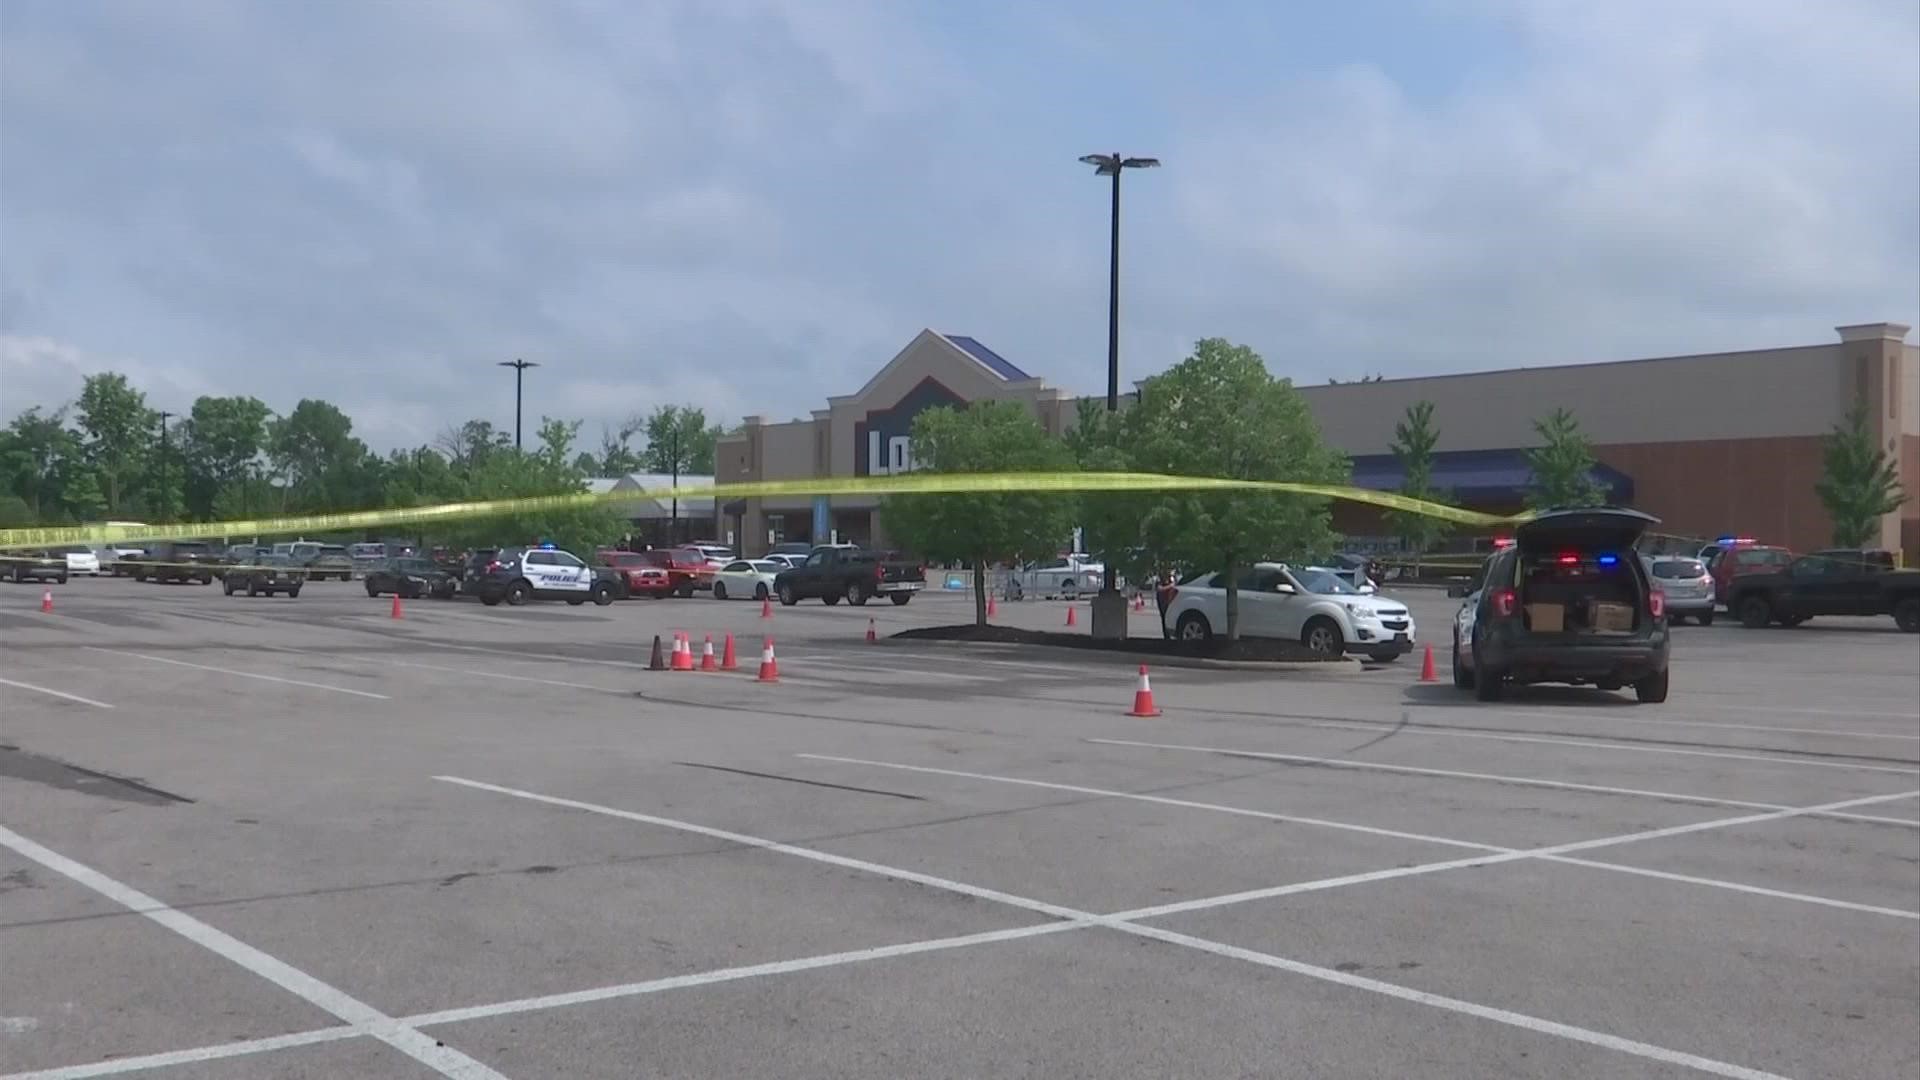 Police said there were multiple 911 calls about shots fired in the parking lot around 2:40 p.m.